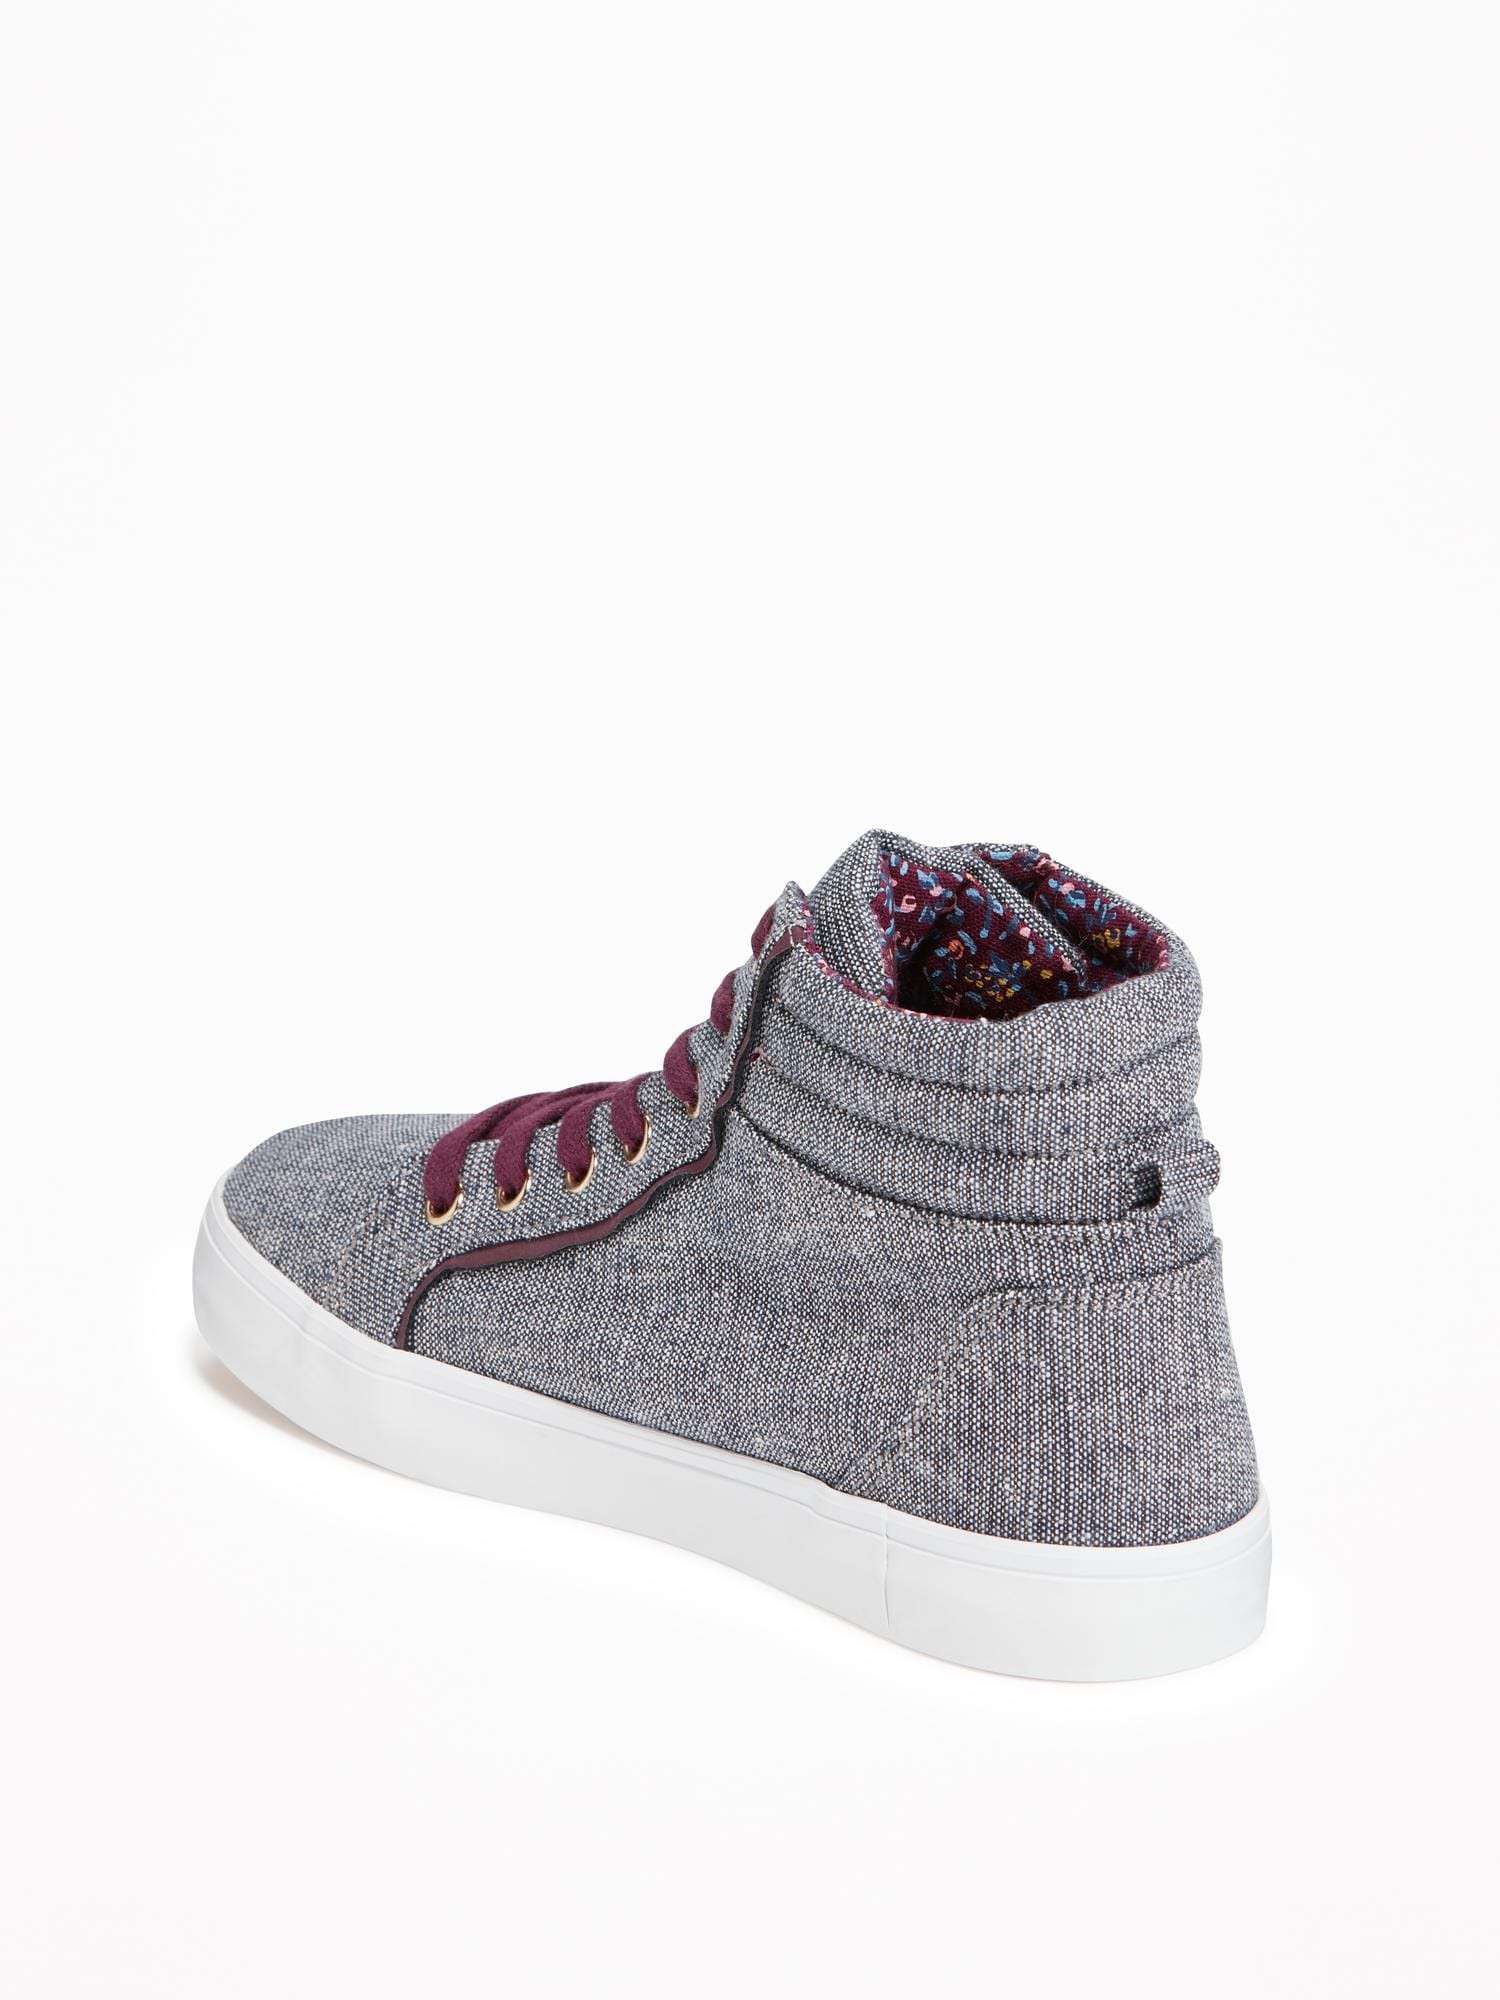 Chambray-Sparkle High-Tops for Girls | Old Navy